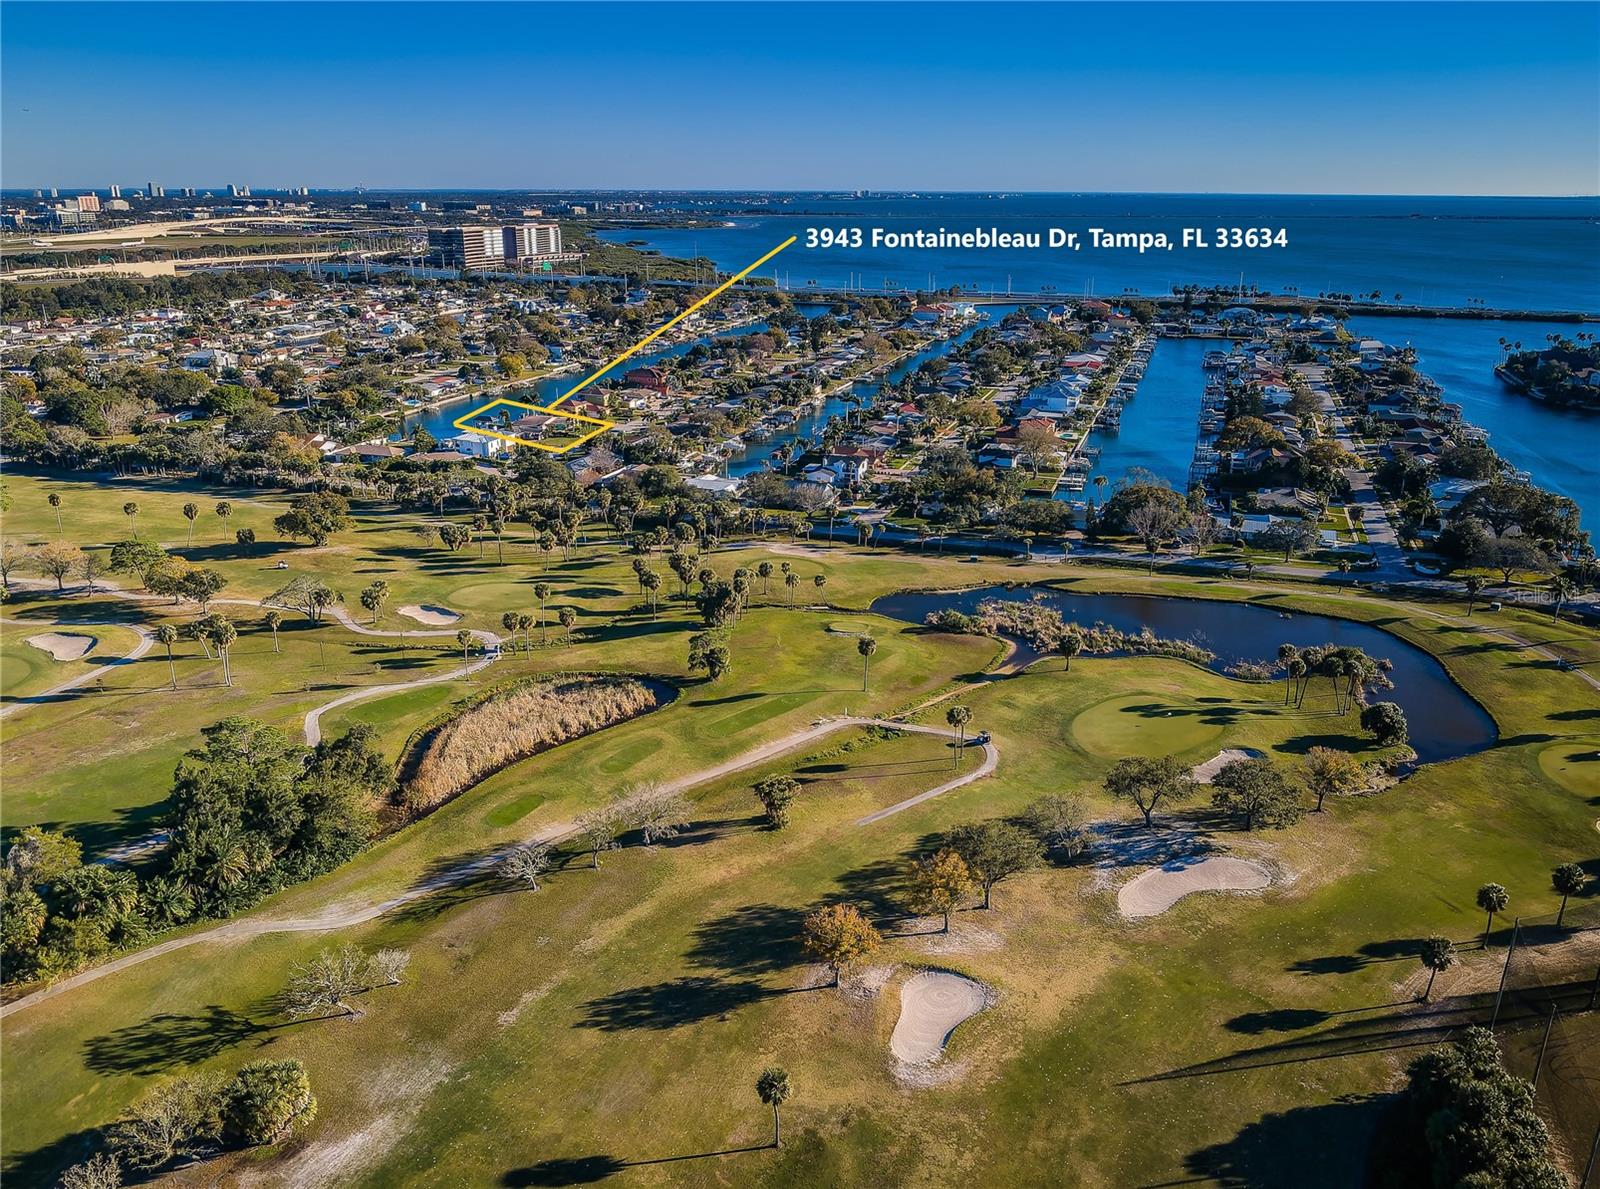 Gorgeous Fontainebleau adjacent to Rocky Point Golf Course on one of Dana Shores widest canals (hard to see due to angle of drone) with direct access to Tampa Bay.